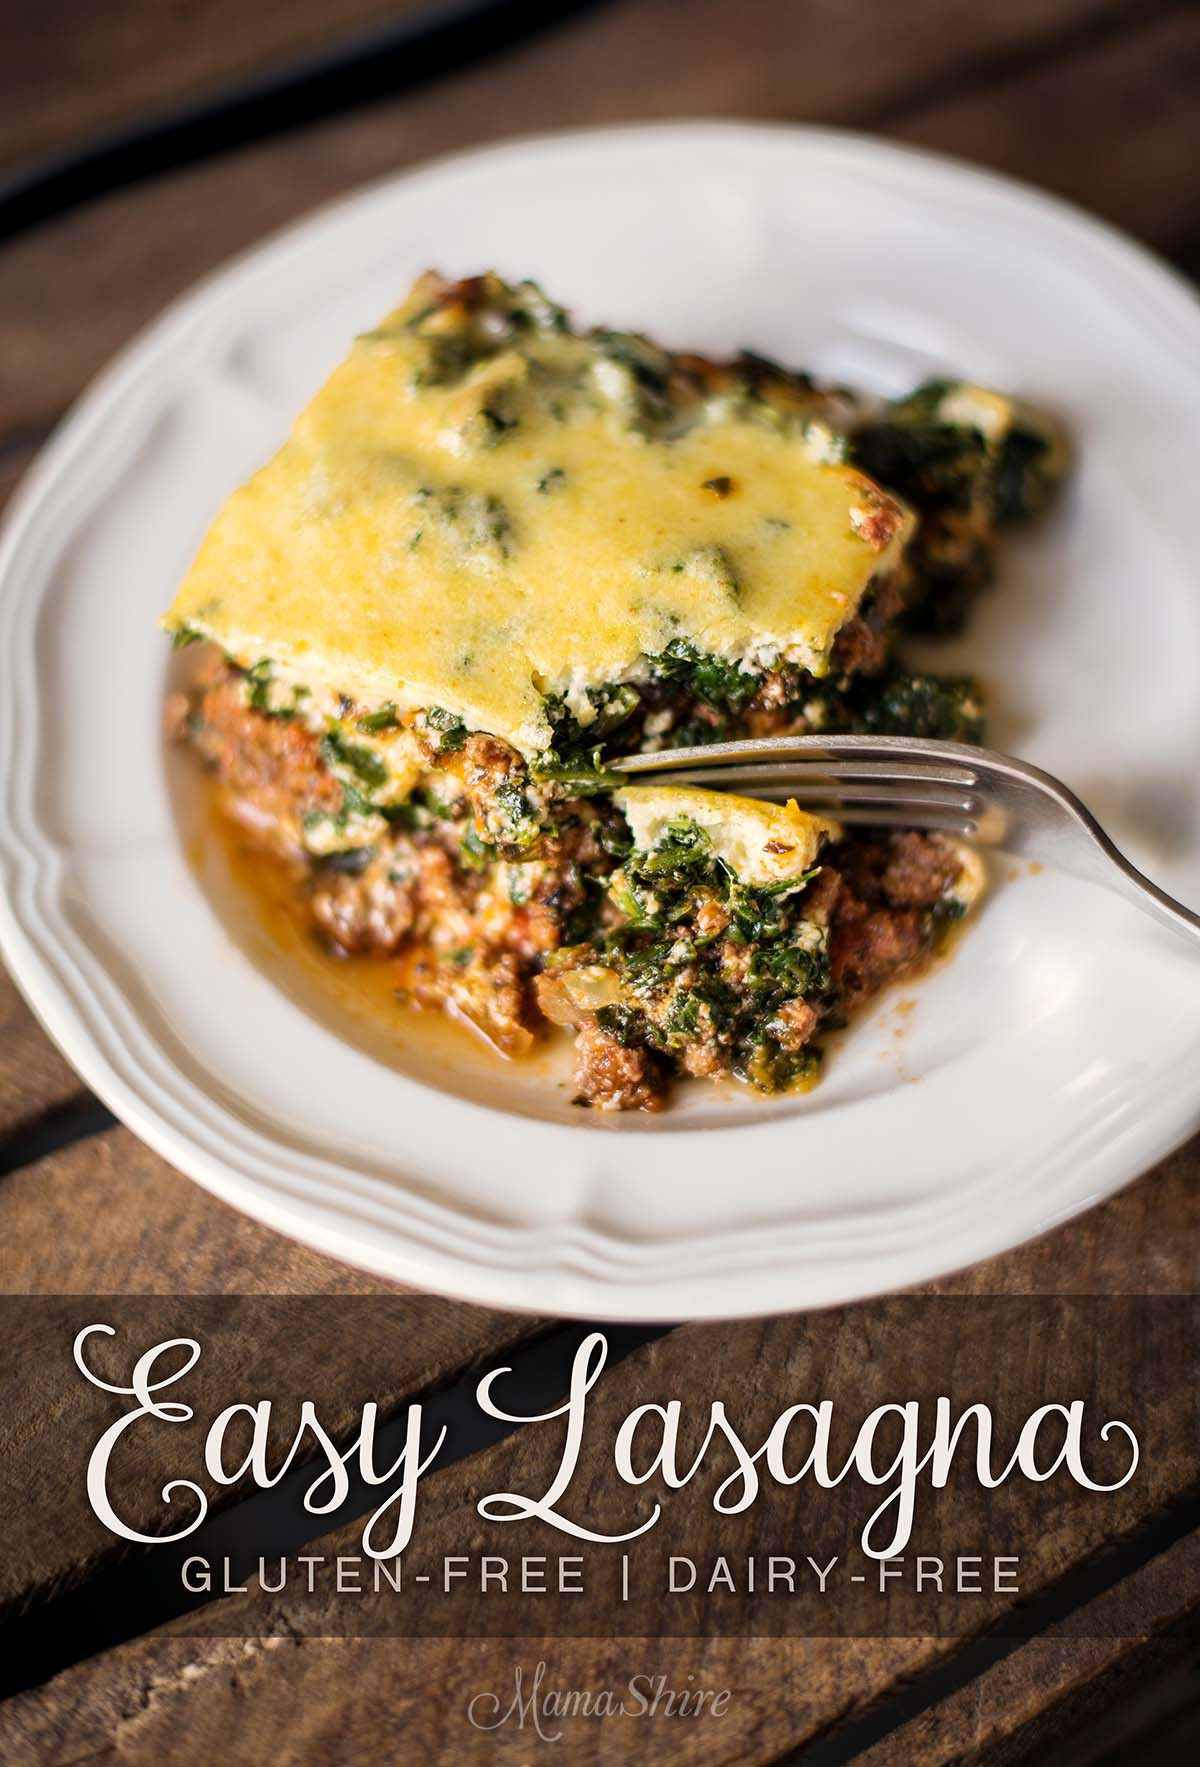 Gluten Free And Dairy Free Recipes
 Easy Lasagna Gluten Free & Dairy Free MamaShireMamaShire